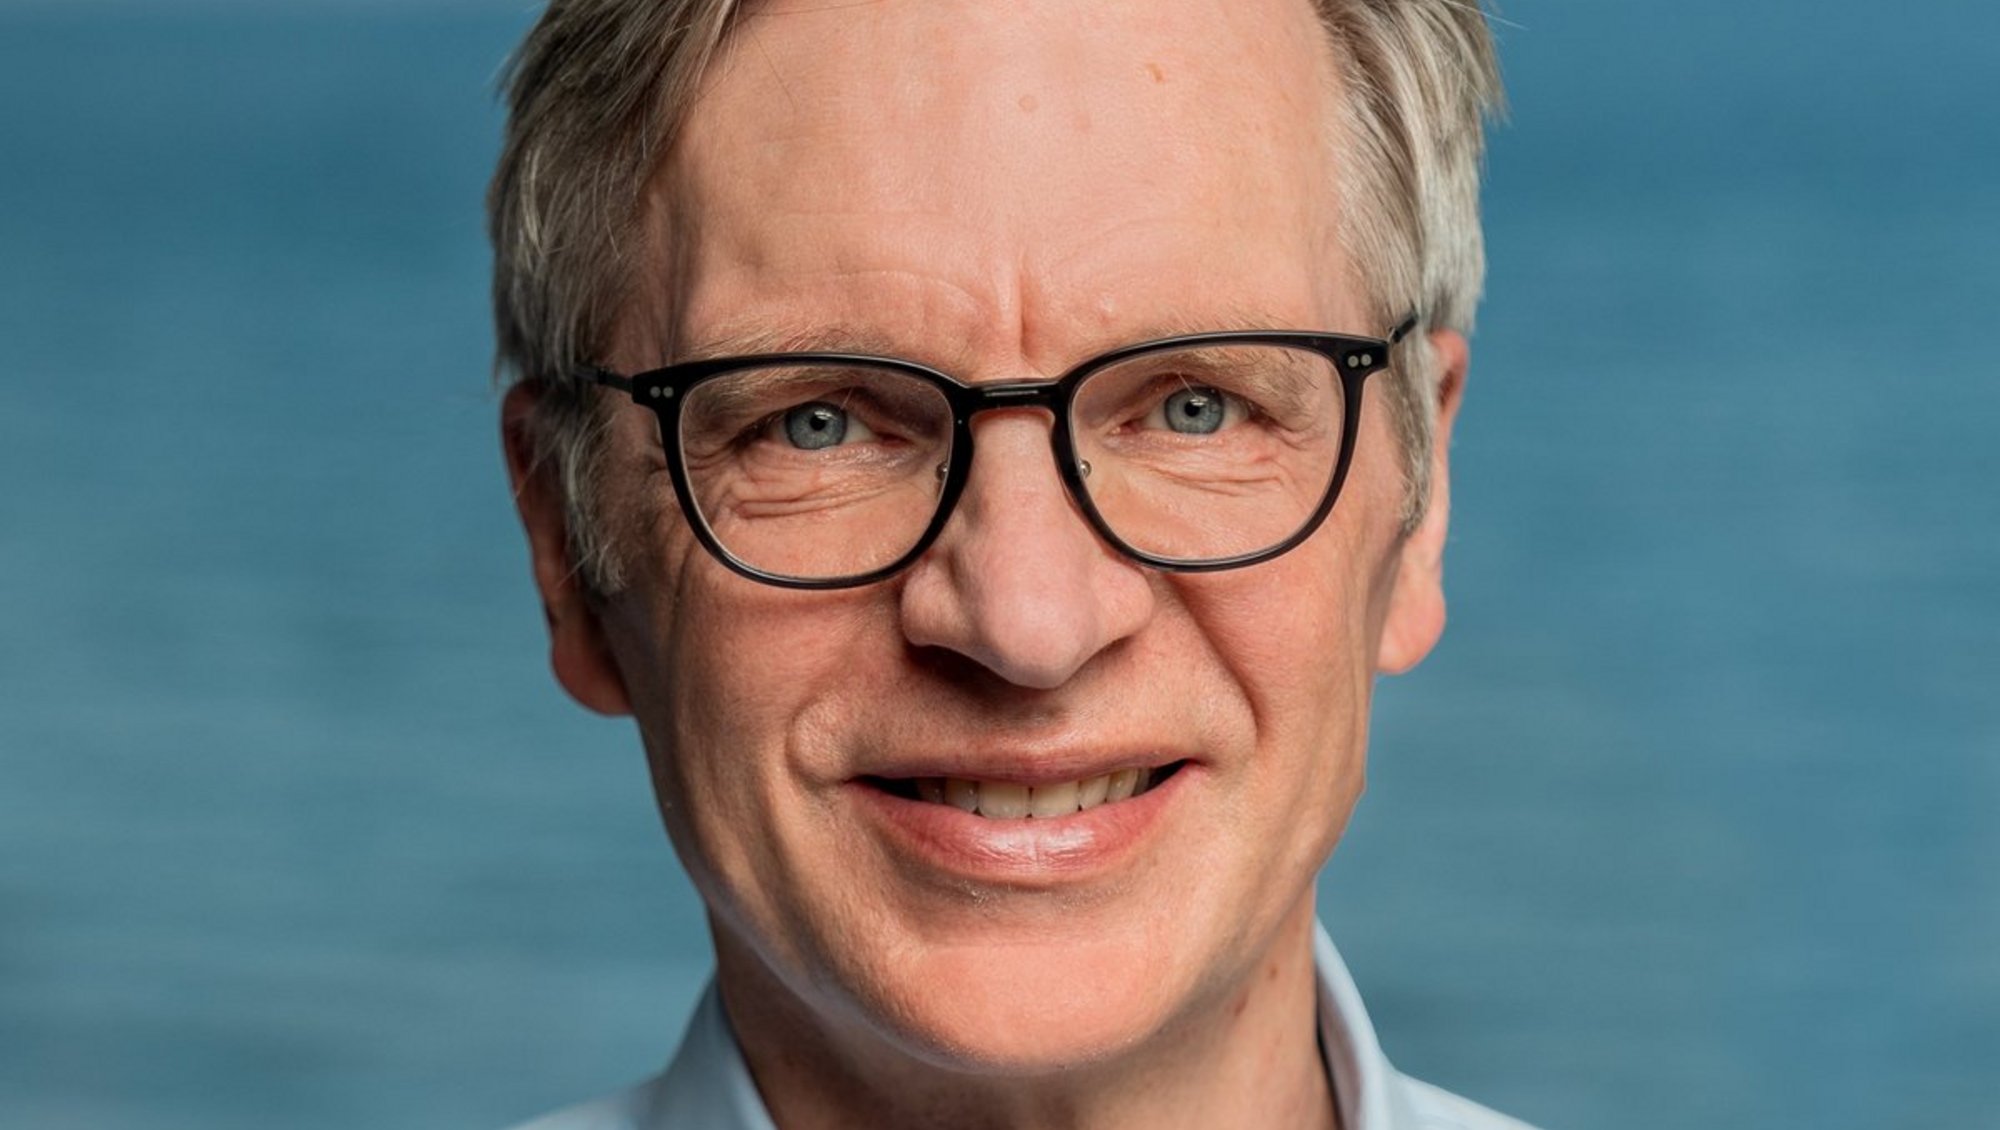 Professor Troels Skrydstrup is part of the CETEC initiative where they collaborate on elimination of waste across the wind energy industry. Photo: The Novo Nordisk Foundation.